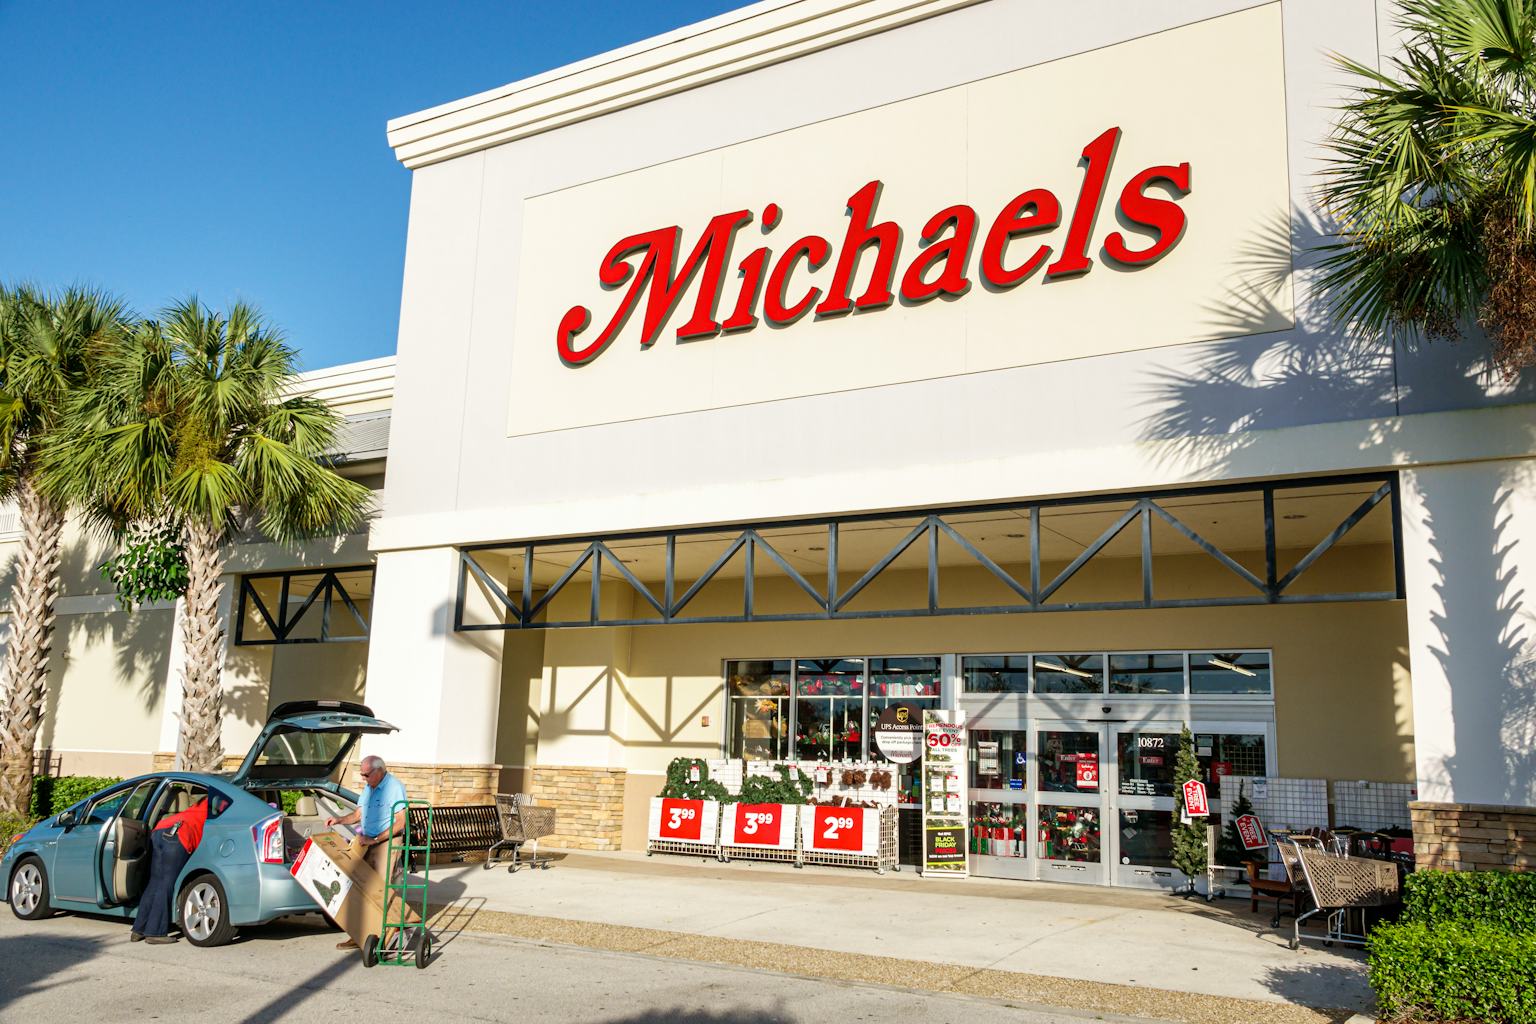 When Does Michaels Put Out Christmas & Holiday 2021 Merchandise?